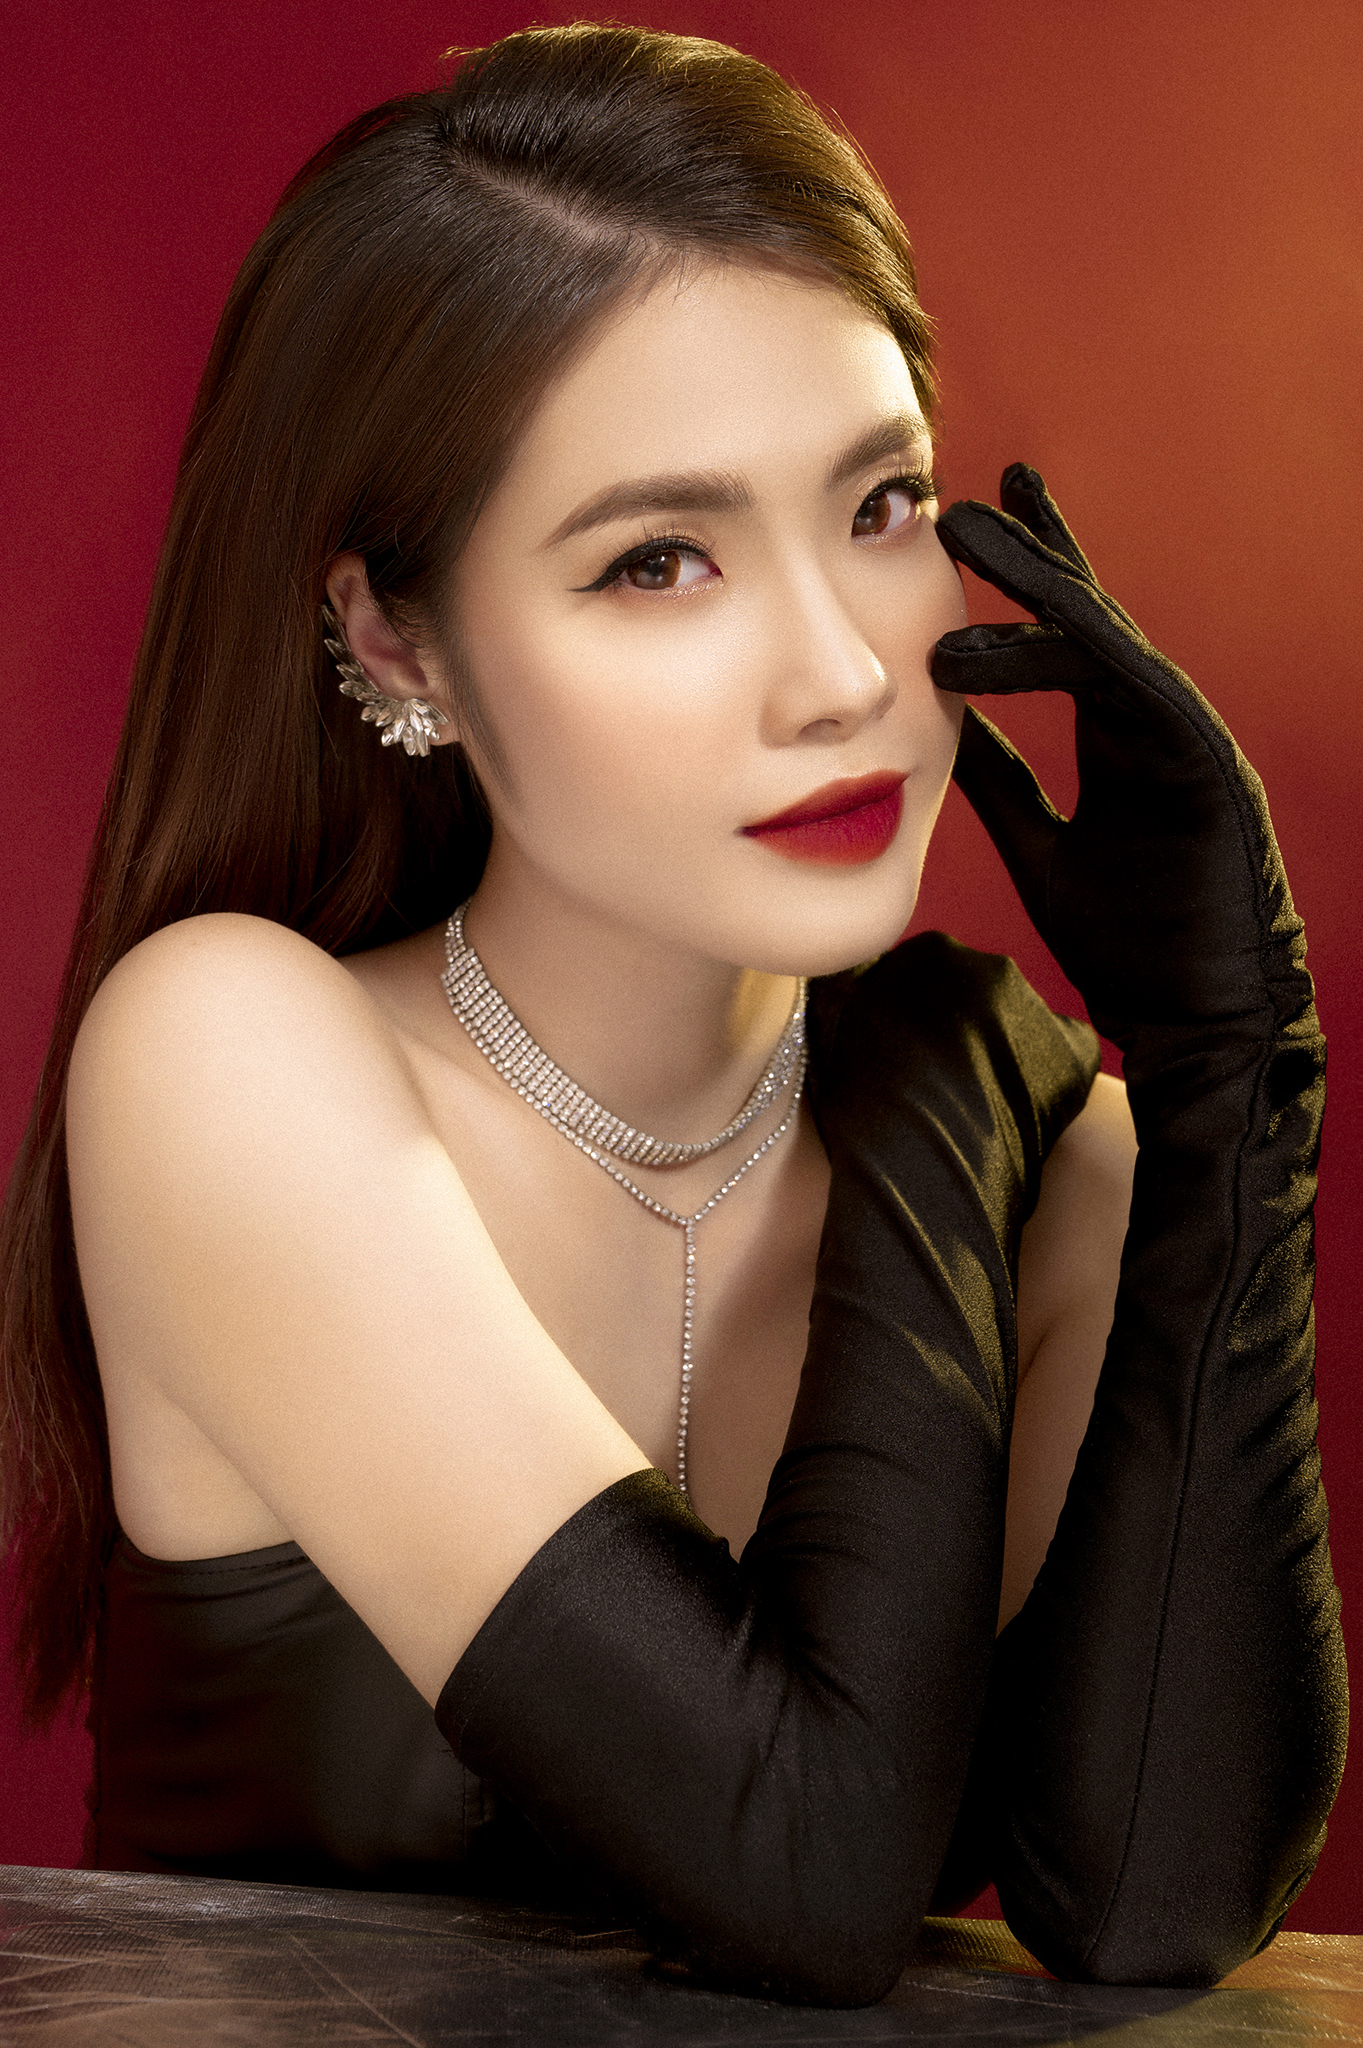 hinh anh chan dung blend and retouch dep7  Aphoto